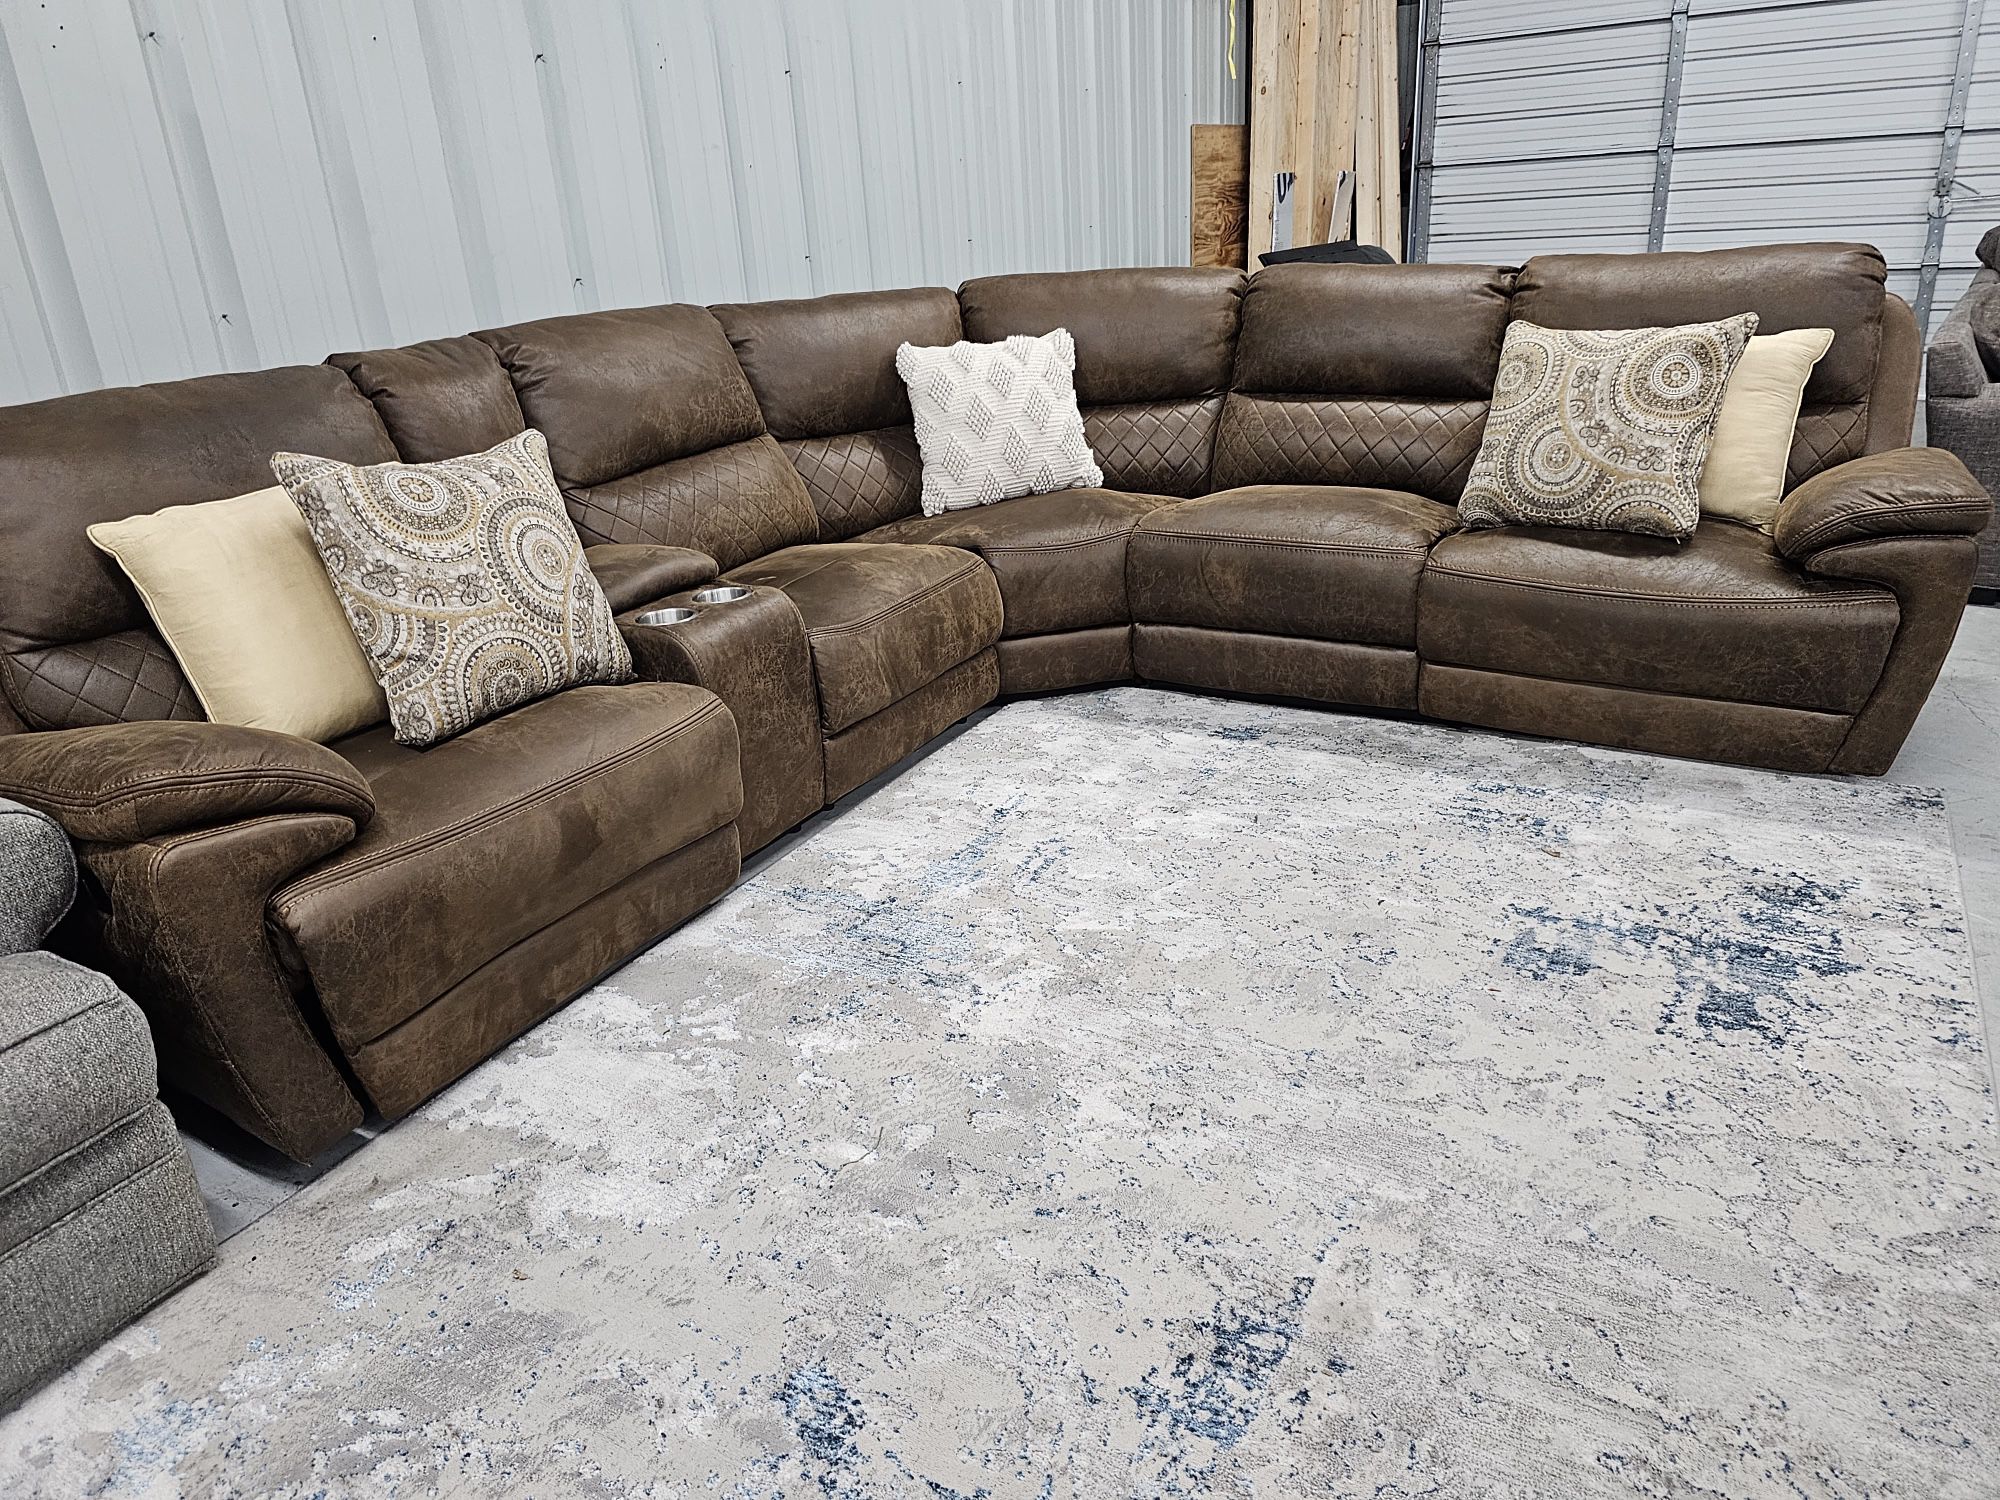 Nice Brown Sectional Couch For Sale With 🚚 SAME DAY DELIVERY 🚚 